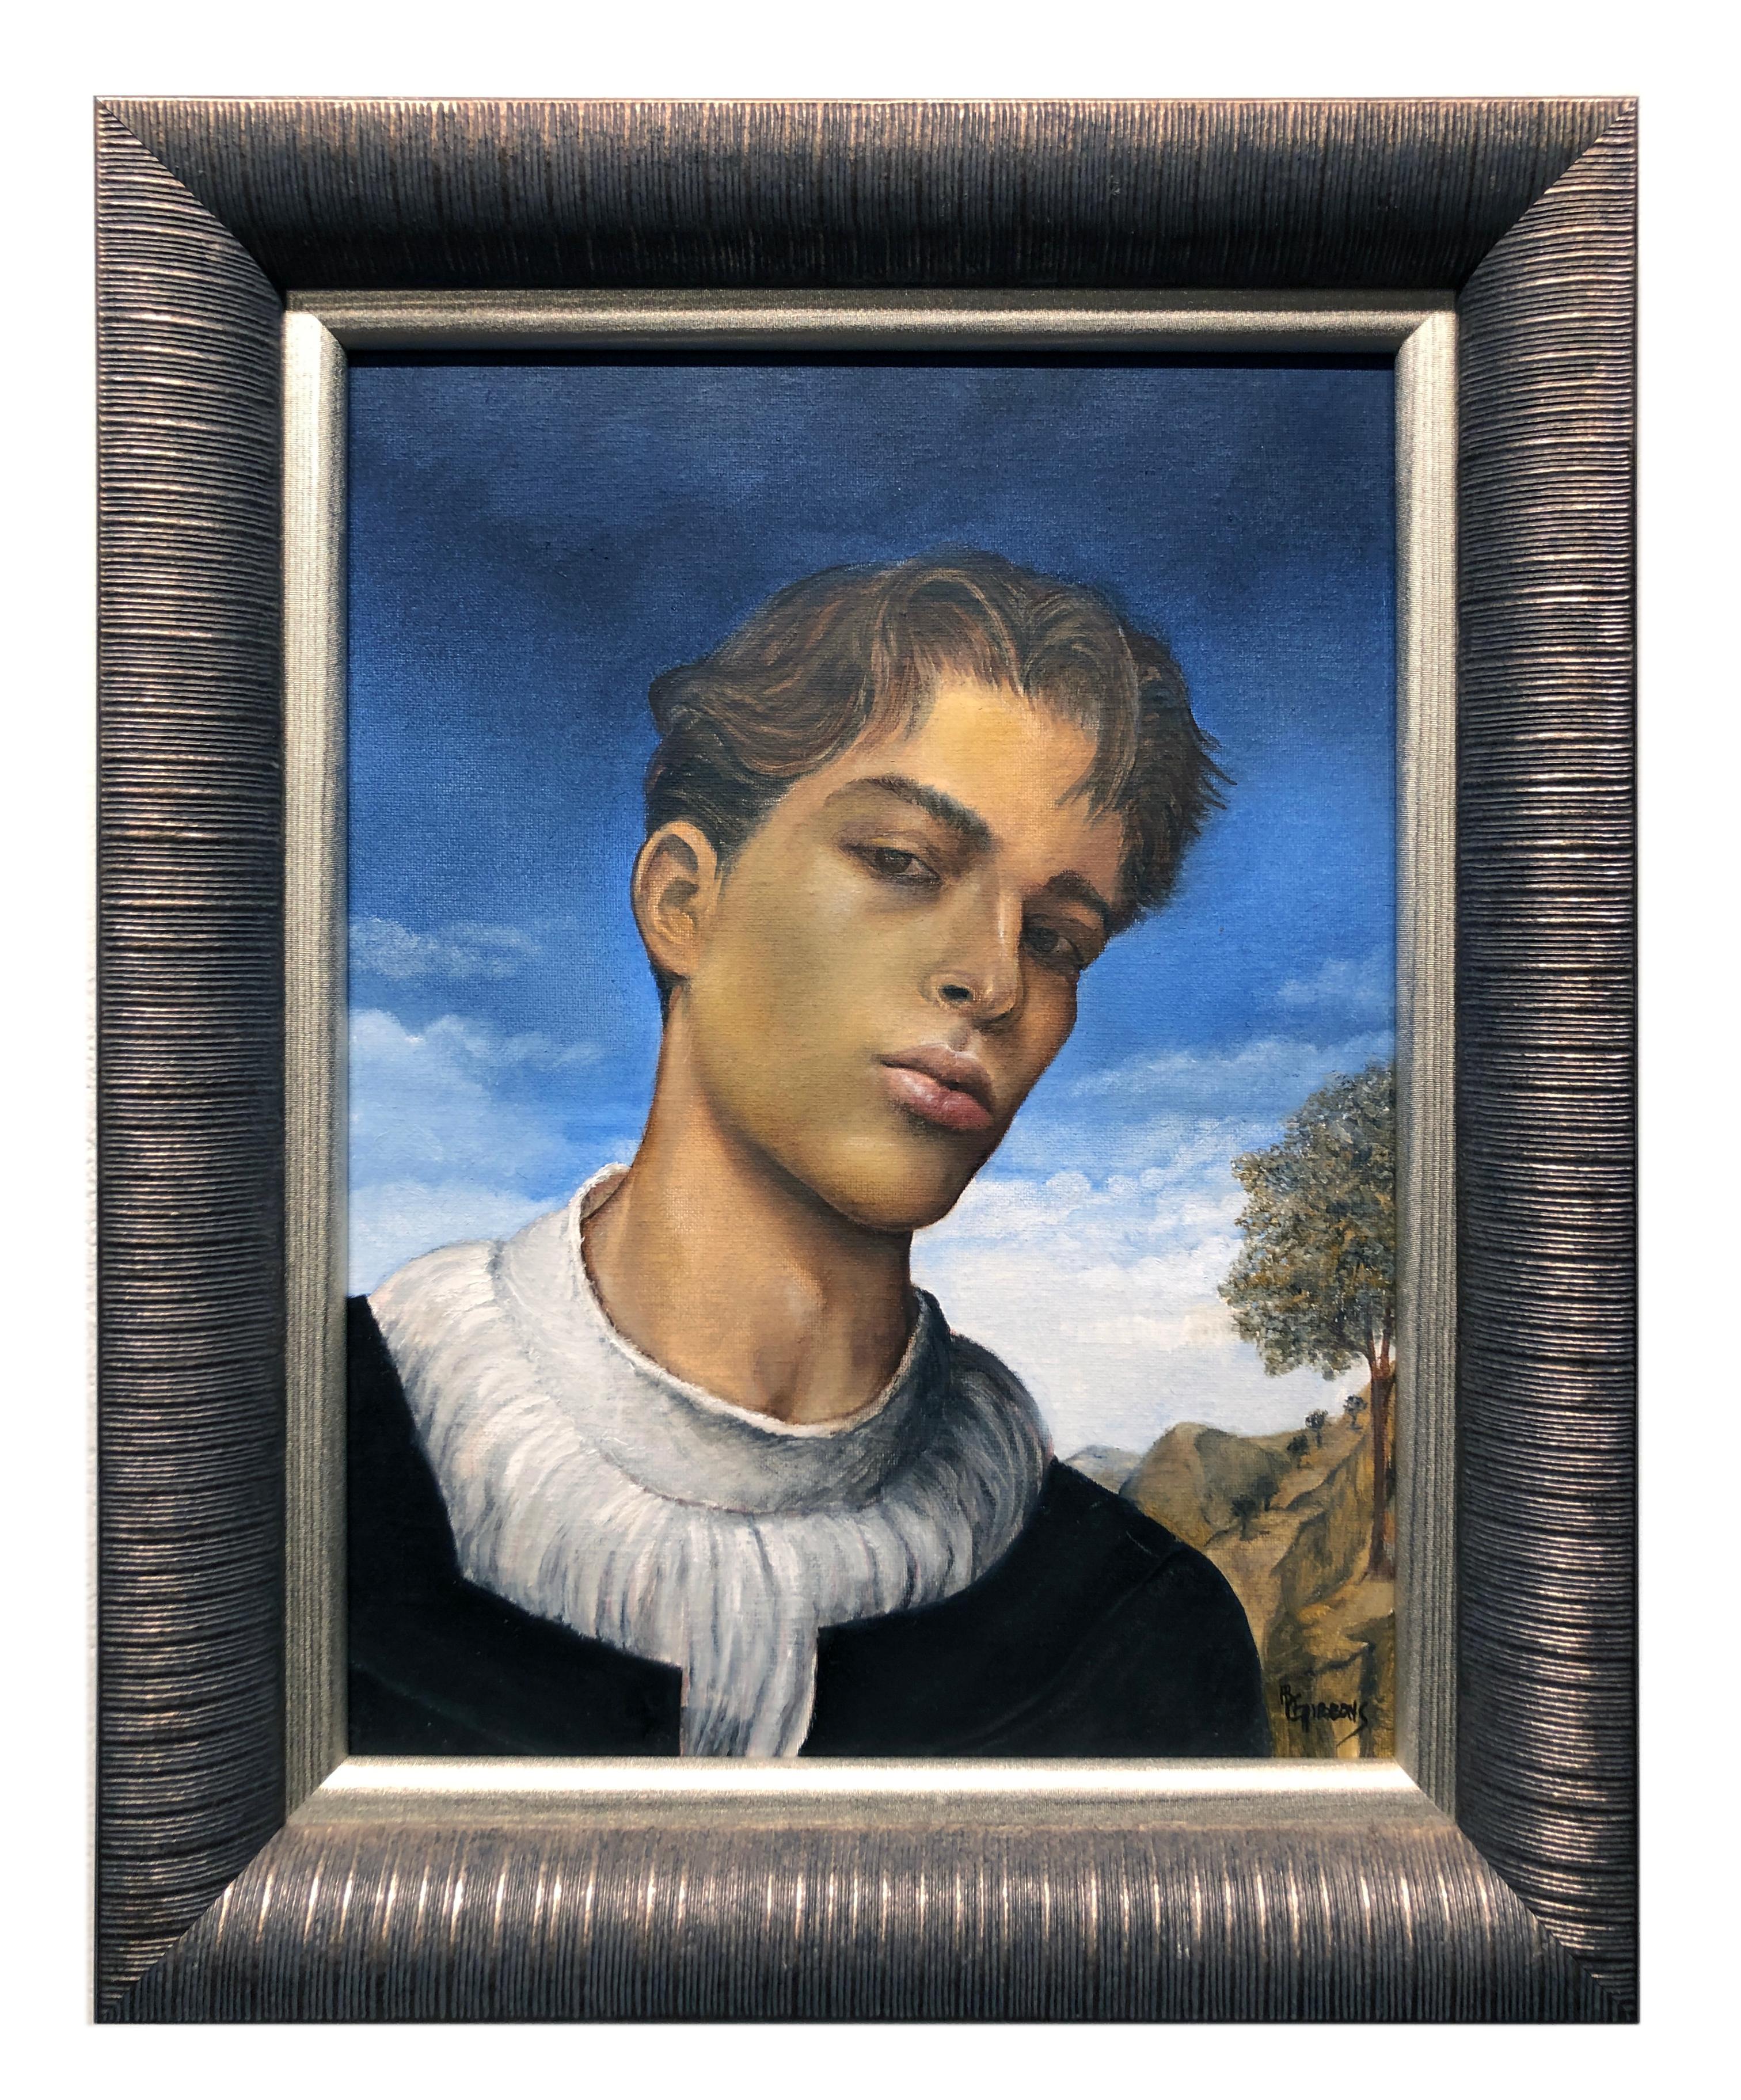 Youth, Portrait of Young Male, Renaissance Style Portraiture, Original Oil - Painting by Richard Gibbons